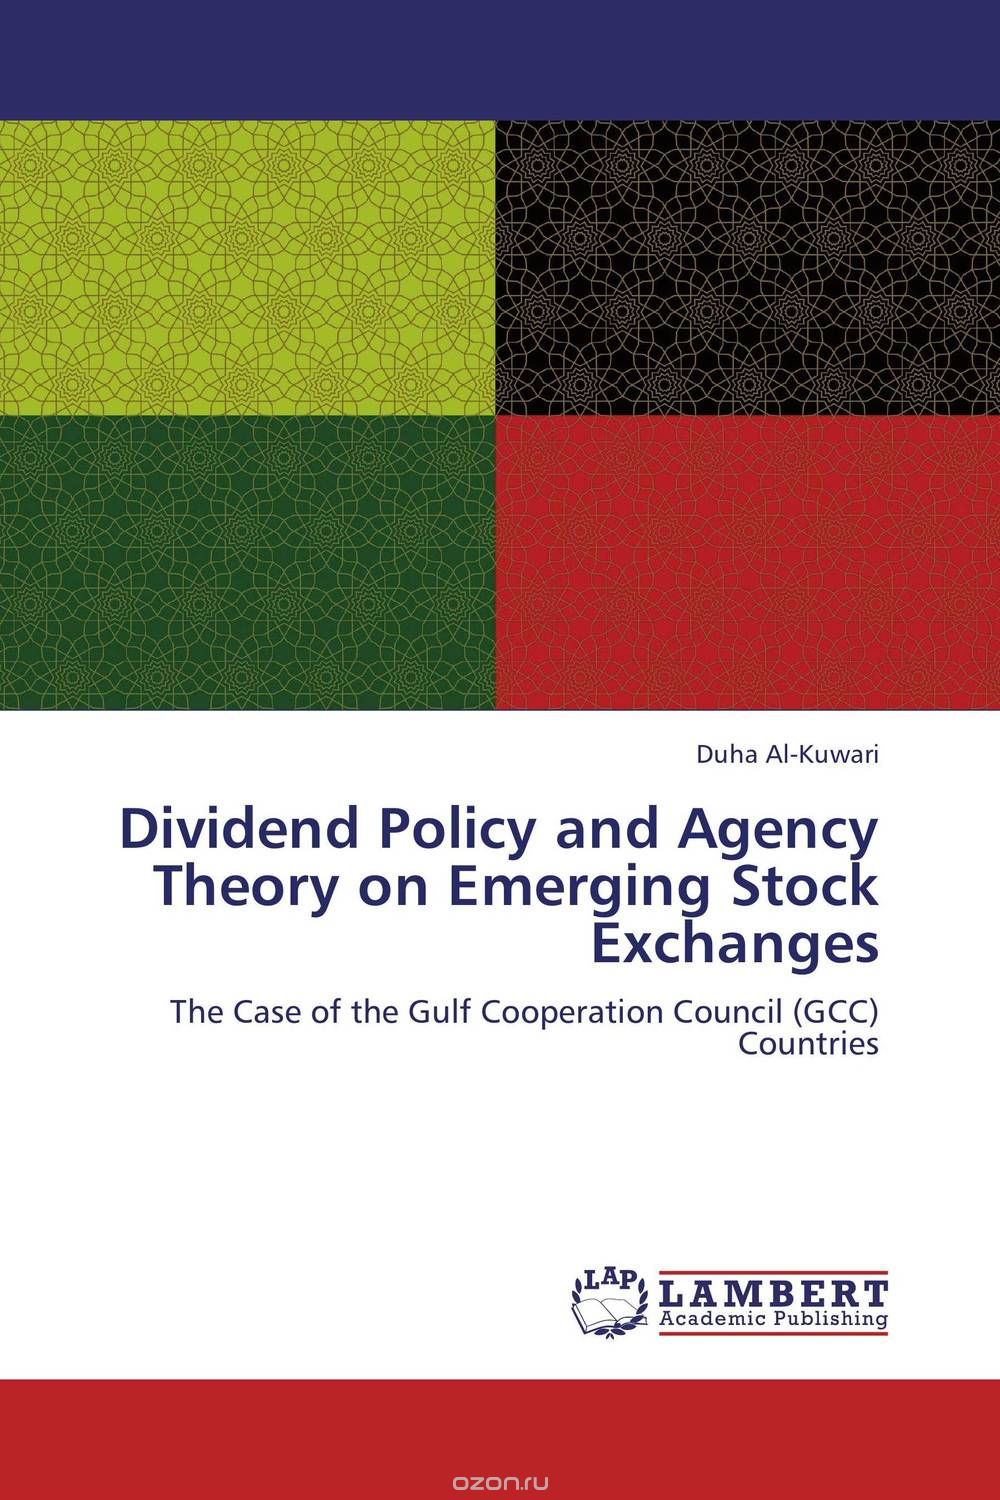 Dividend Policy and Agency Theory on Emerging Stock Exchanges